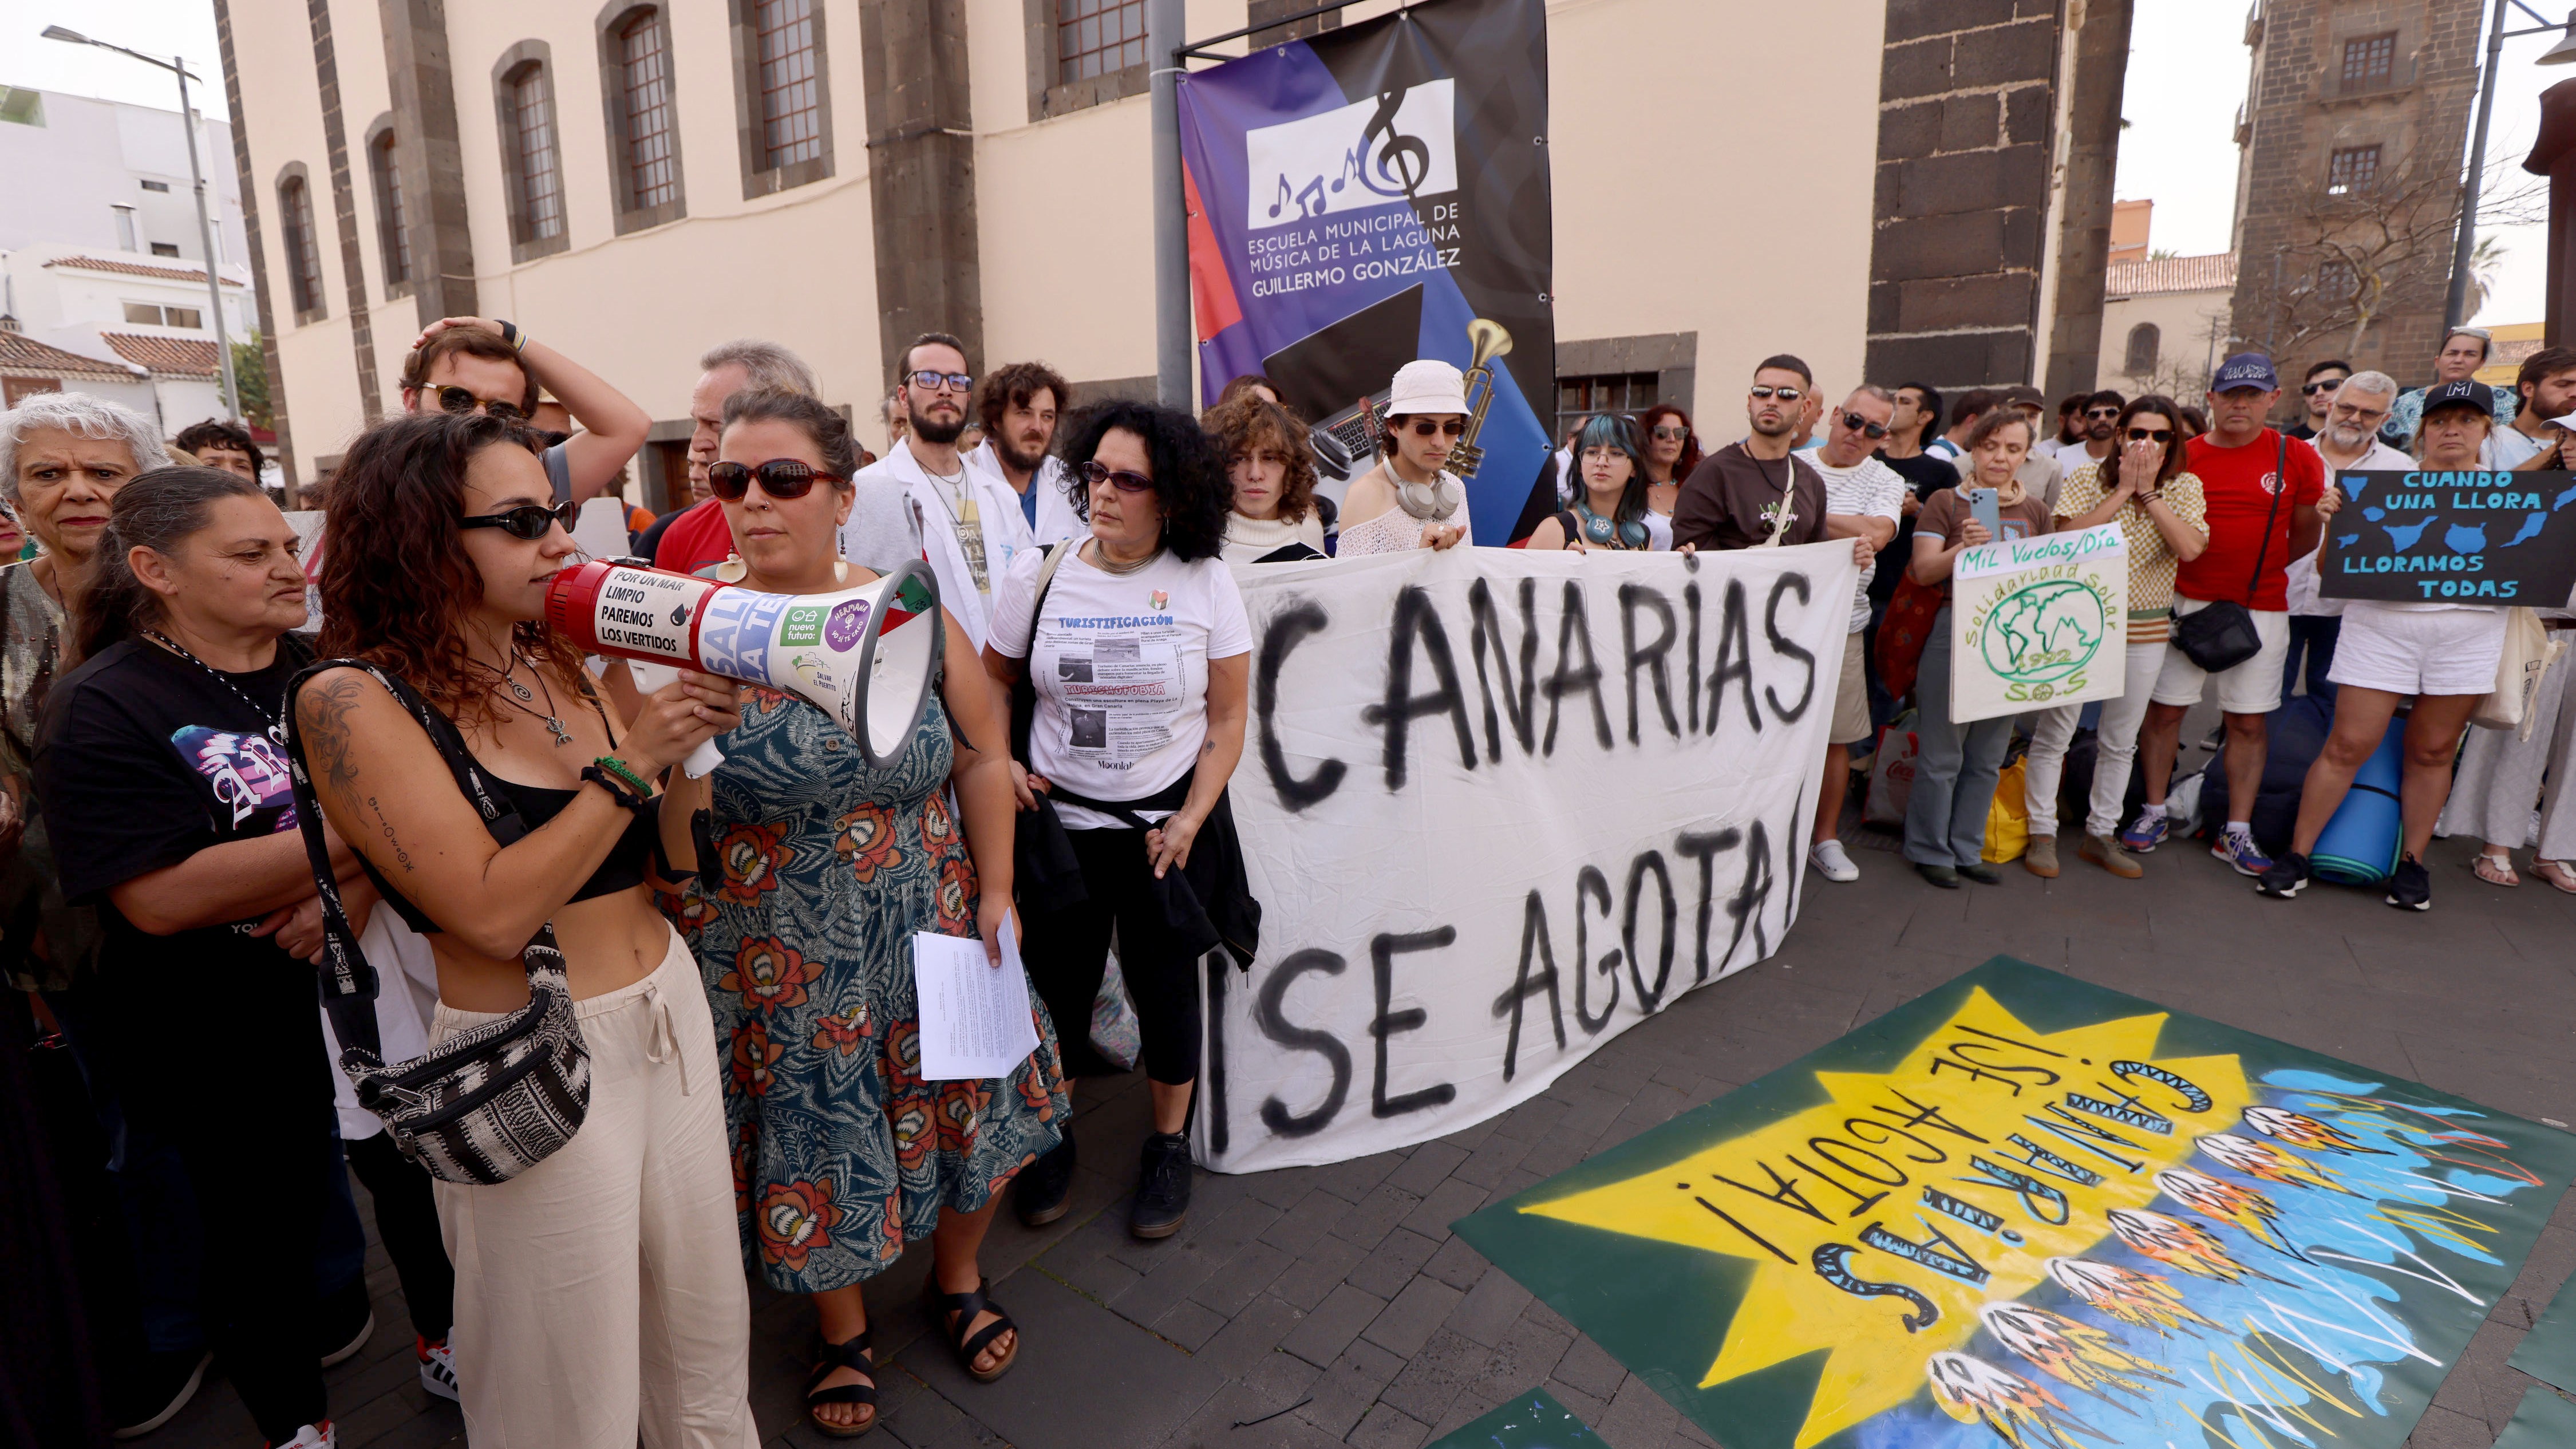 Campaigners are taking to the streets in the Canary Islands in anti-mass tourism protests with the slogans “The Canaries have a limit”